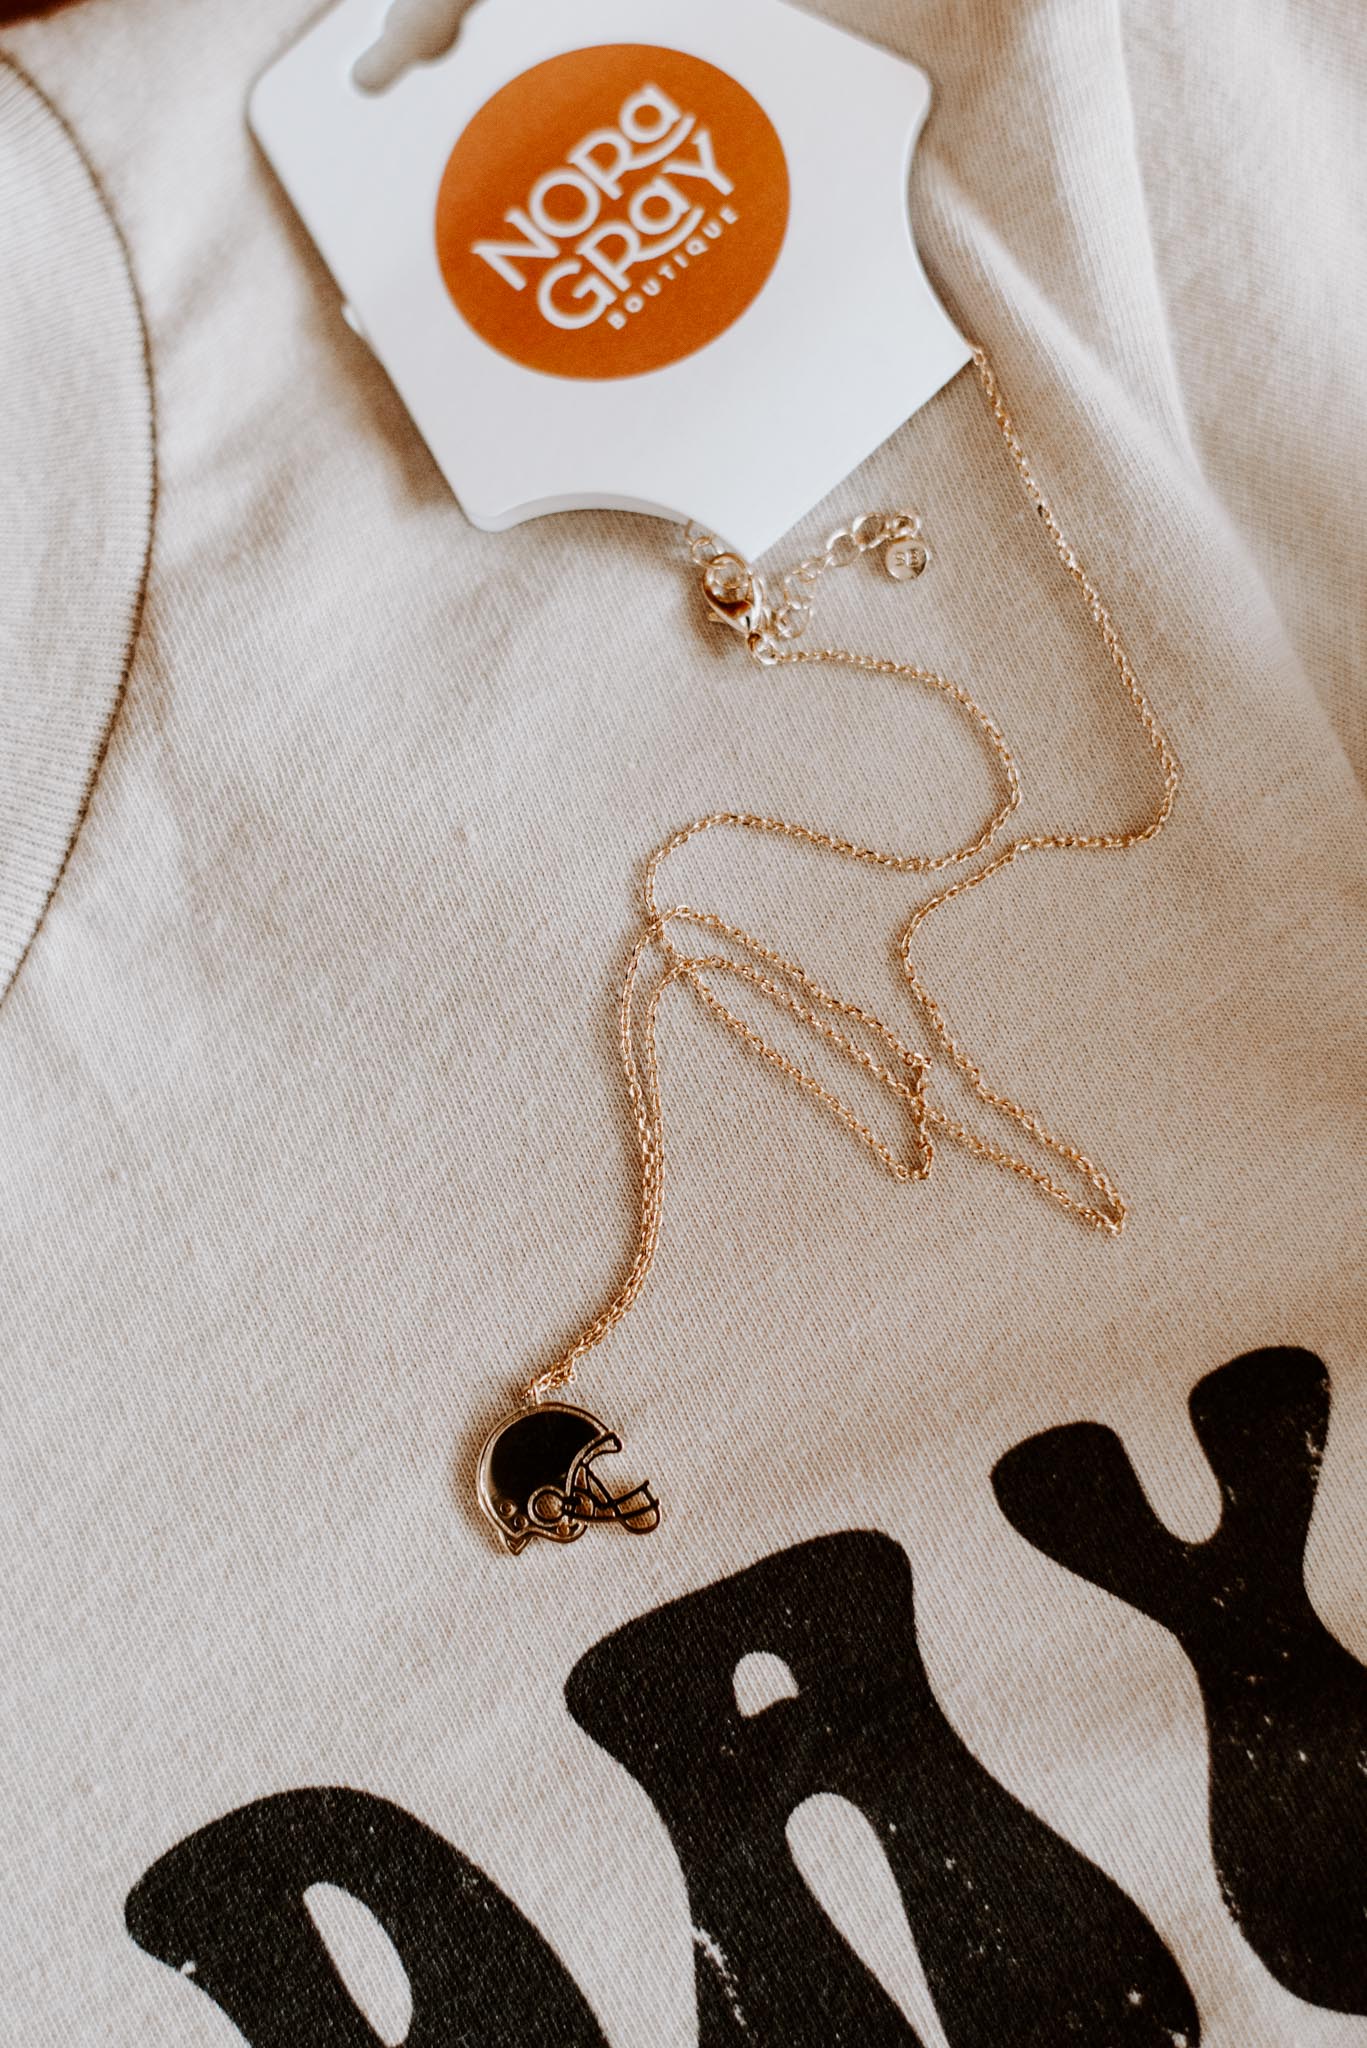 Football Helmet Necklace | 14K Gold Dipped